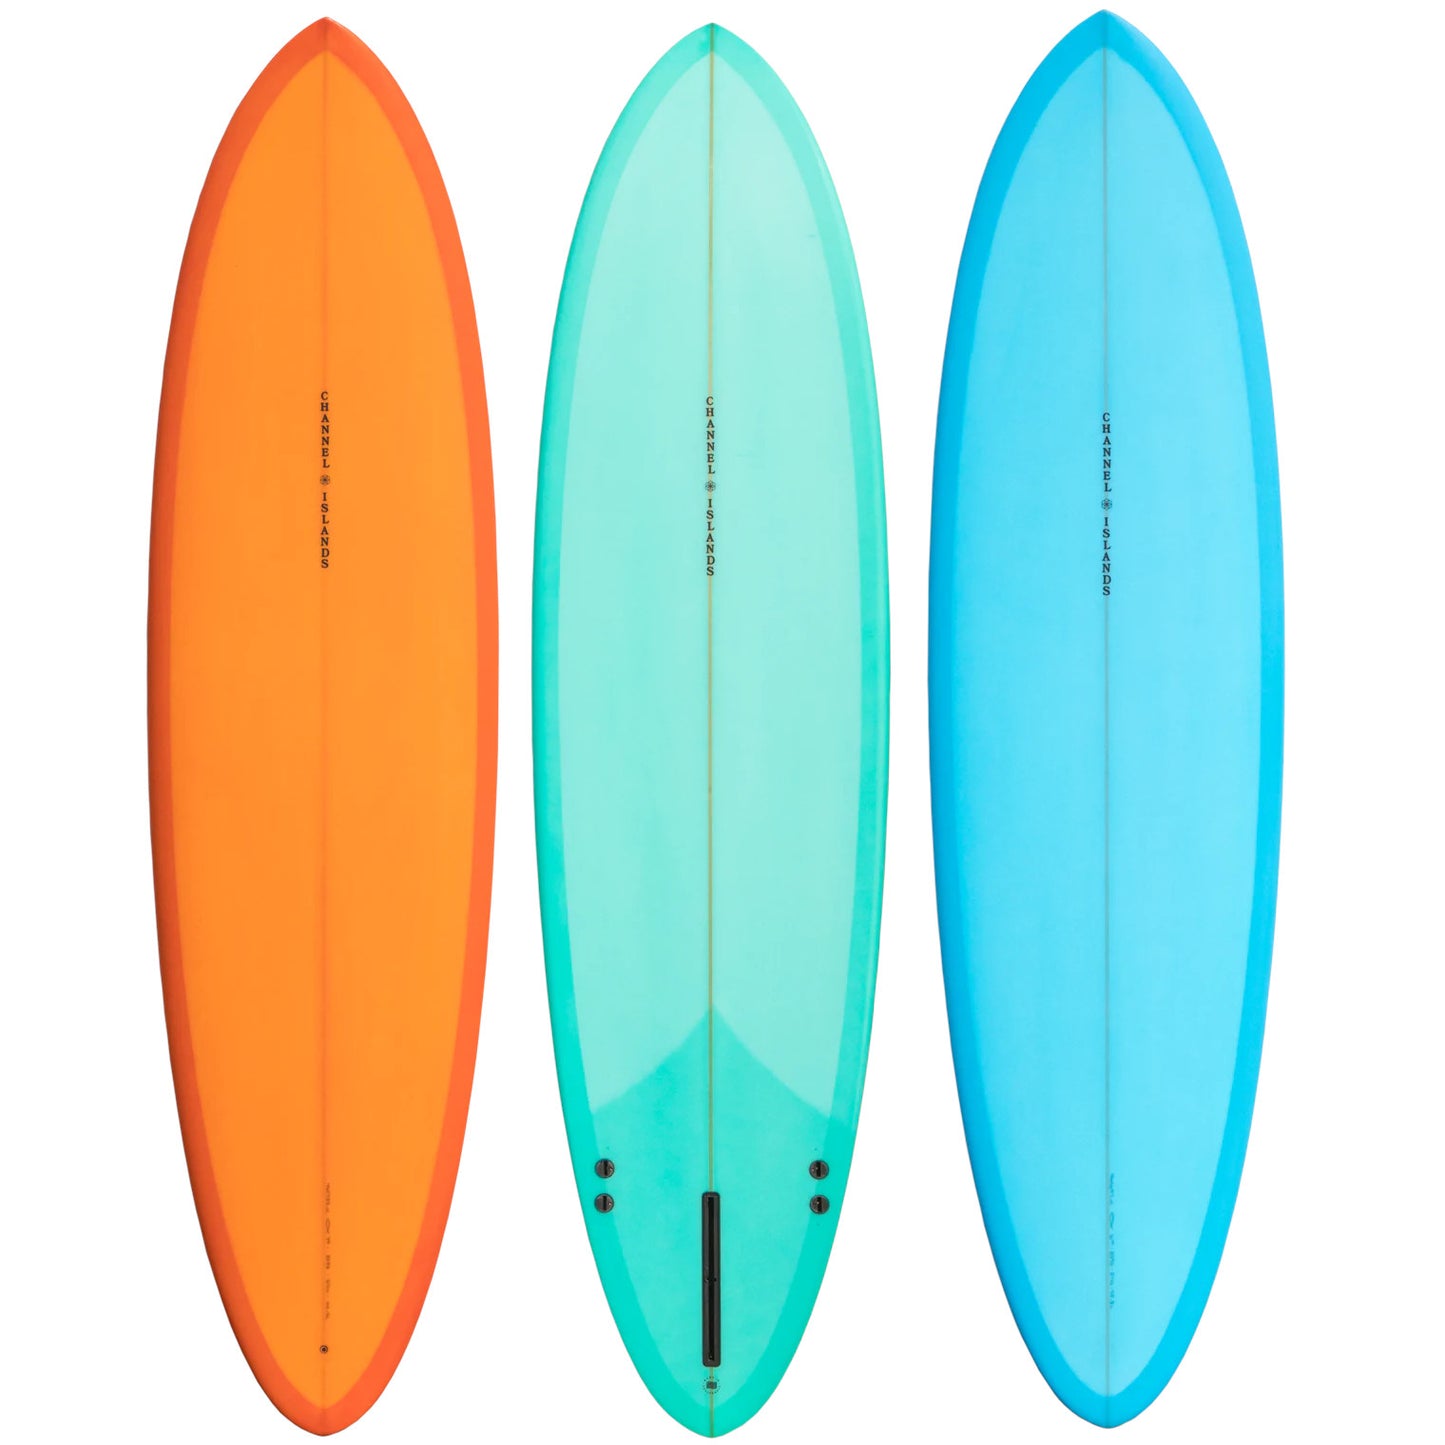 channel-islands-midlength-ci-mid-surfboard-all-colours-orange-blue-green-aqua-two-plus-one-galway-ireland